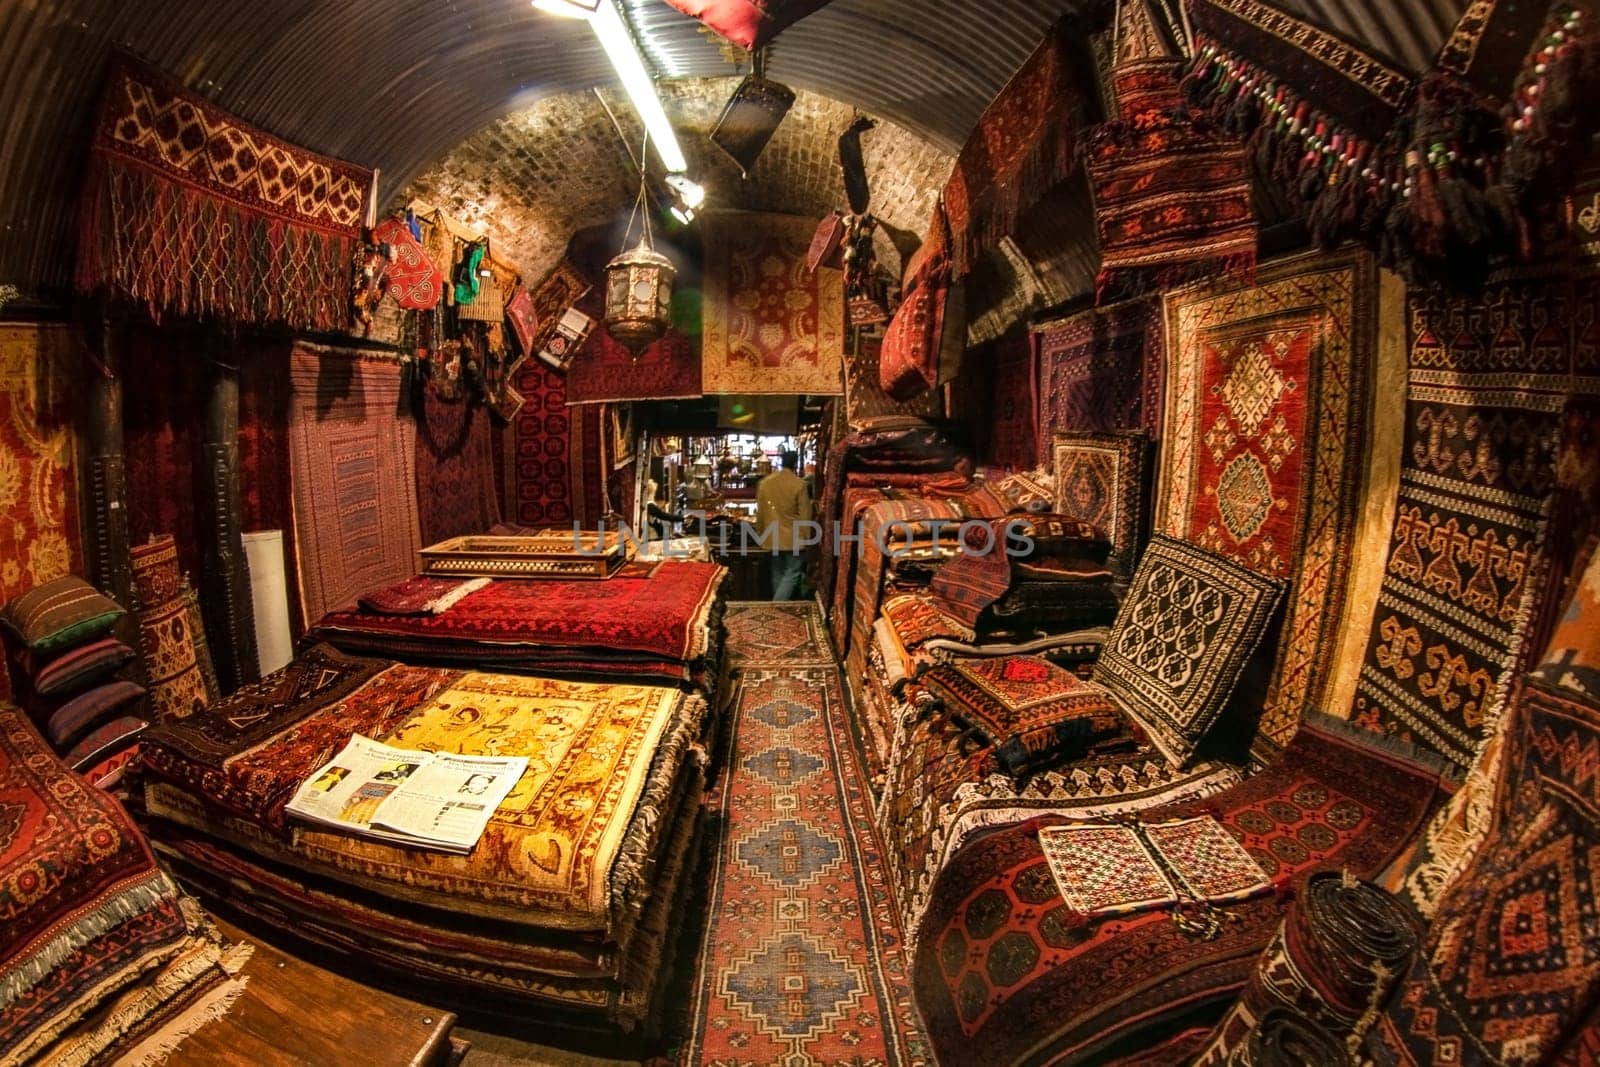 London, United Kingdom - April 01, 2007: Extreme wide angle (fisheye) photo  - oriental rugs and carpets on display at one of Camden Lock stalls, famous flea market in UK capital. by Ivanko